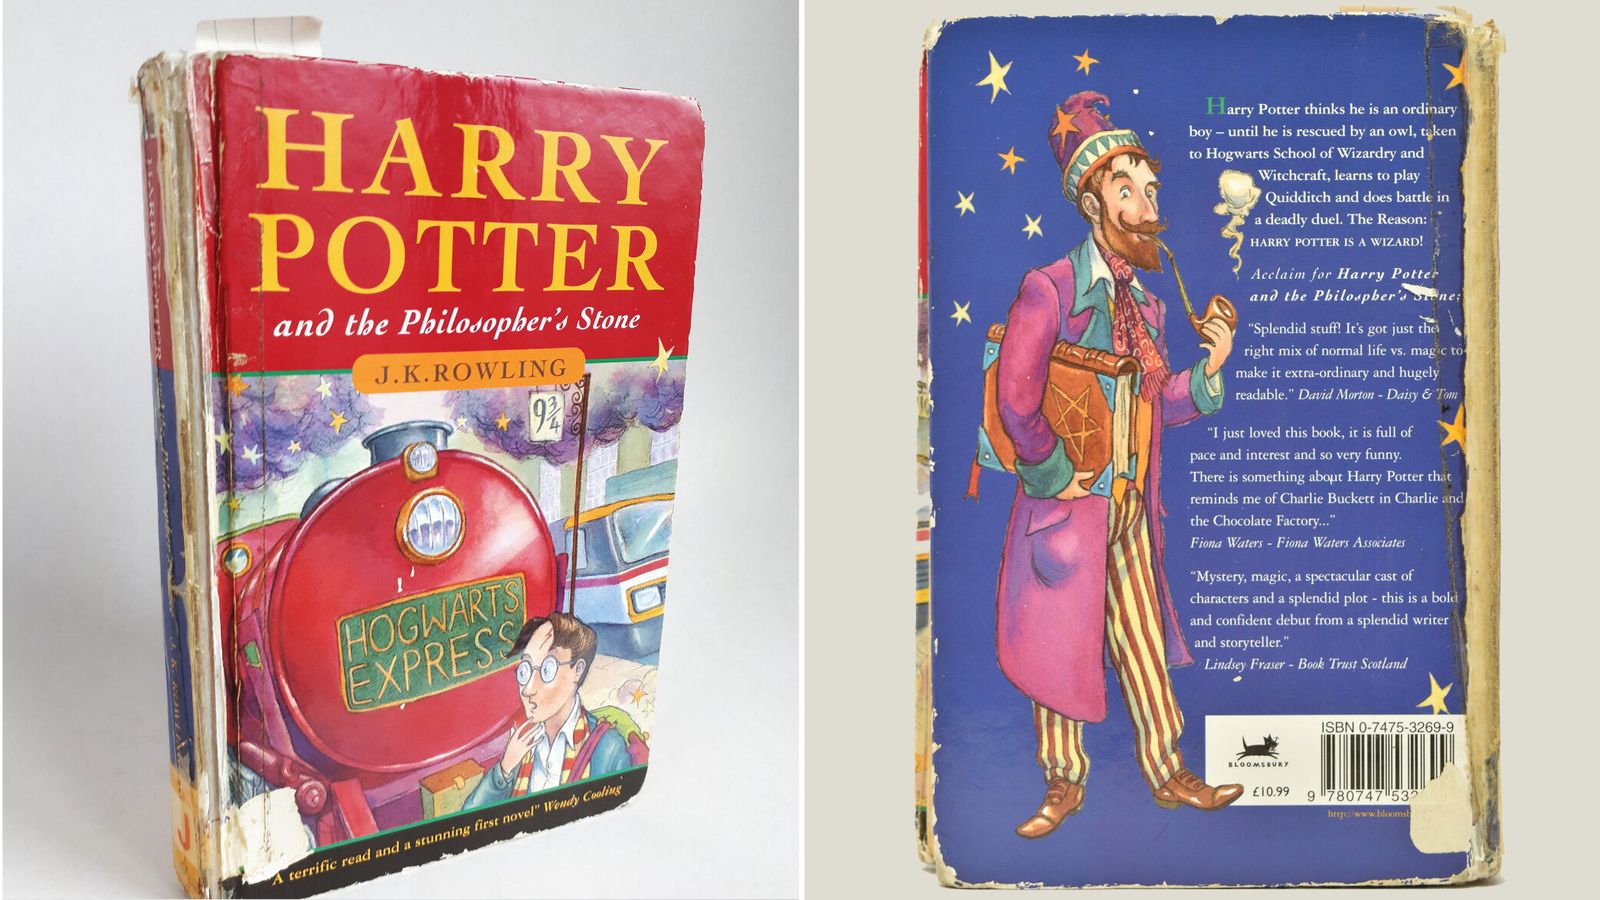 Harry Potter book bought for 30p sells for £10,500 at auction